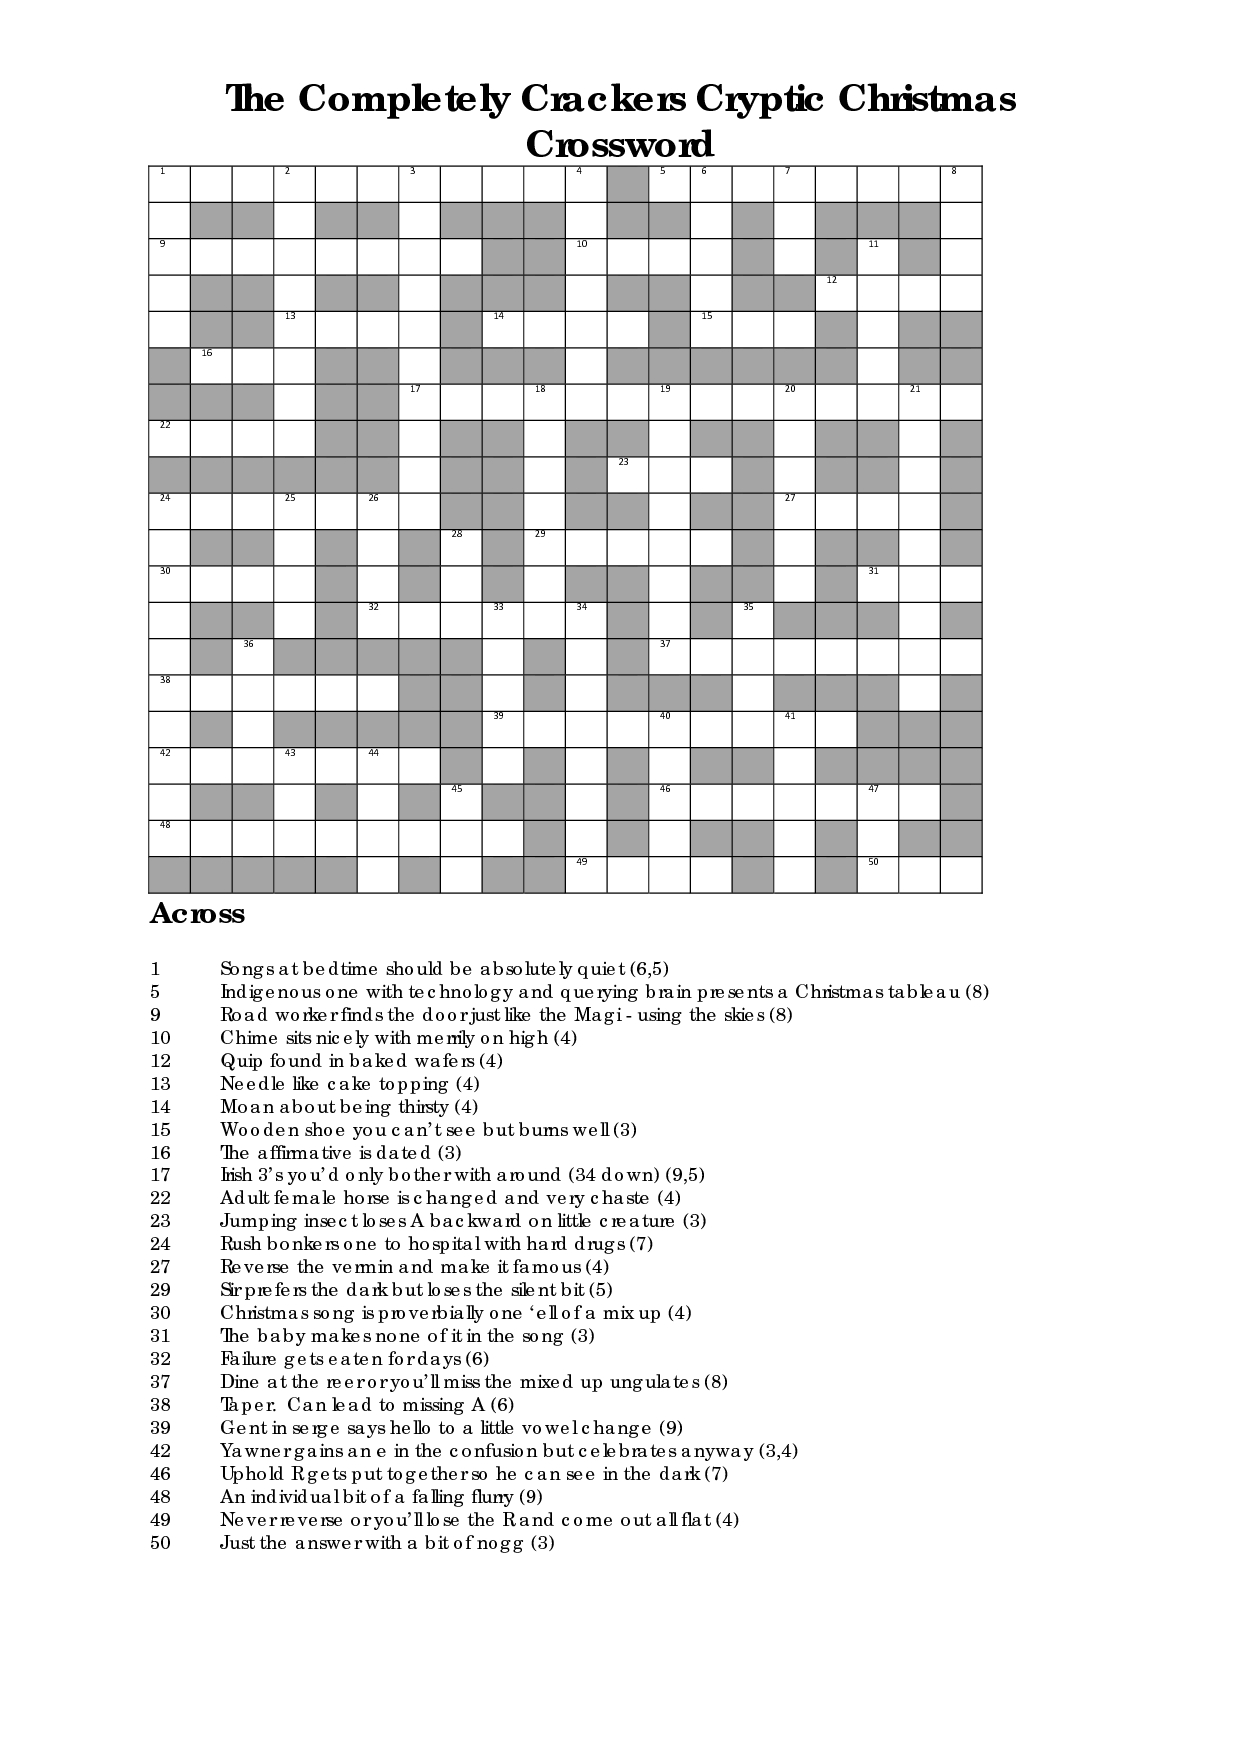 Christmas Crossword Puzzles To Print | The Completely Crackers - Printable Cryptic Crossword